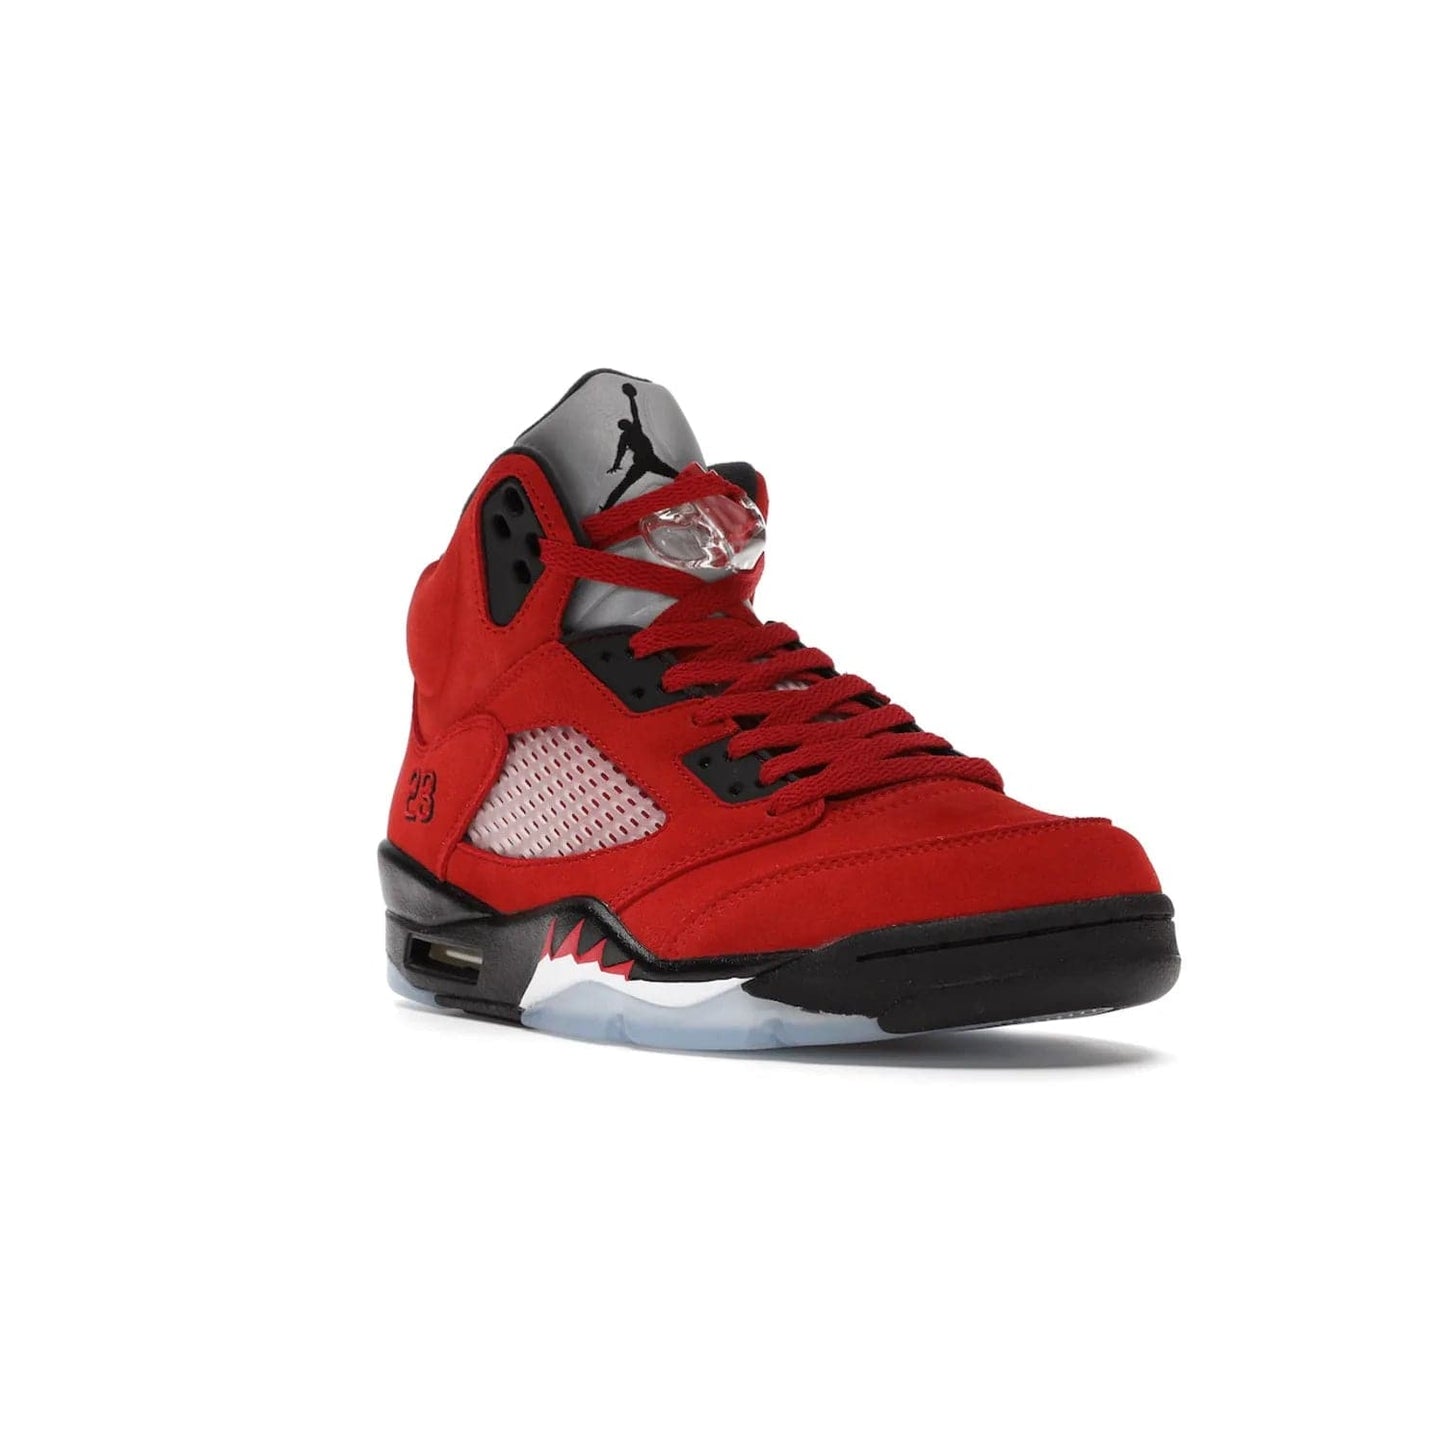 Jordan 5 Retro Raging Bull Red (2021) - Image 6 - Only at www.BallersClubKickz.com - Get ready for the 2021 stand-alone release of the Air Jordan 5 Raging Bulls! This all-suede upper combines luxe details like a Jumpman logo, red & black "23" embroidery and shark tooth detailing, atop a black midsole. Don't miss out - release date in April 2021 for $190.